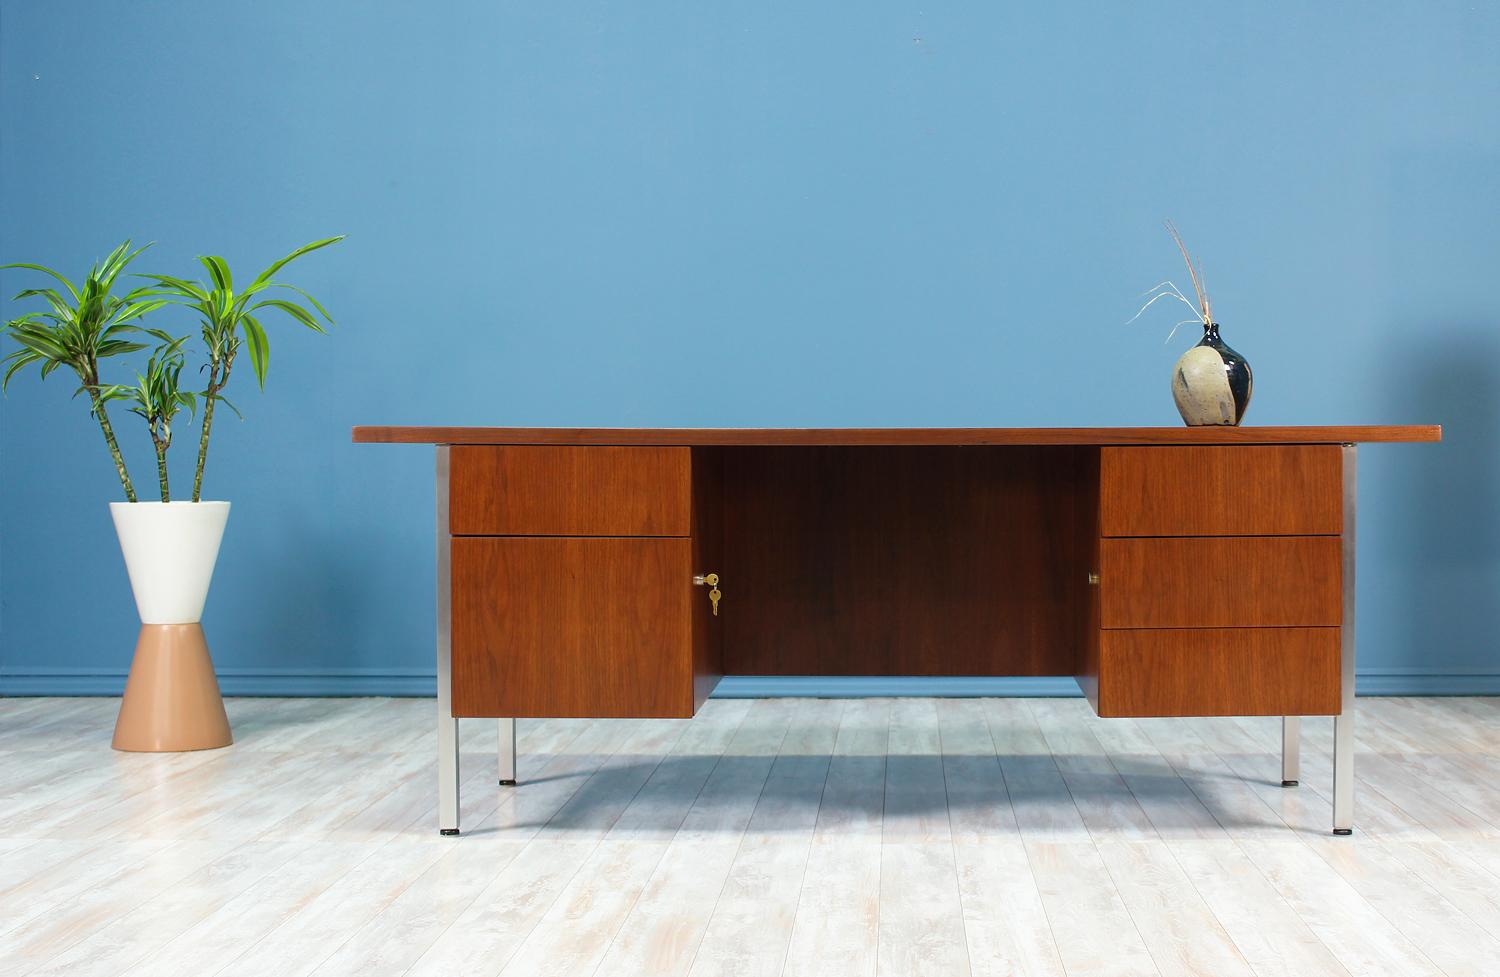 Designer: by Florence Knoll
Manufacturer: Knoll Inc.
Country of origin: United States
Date of manufacture: 1950-1959
Materials: Walnut wood, chromed steel
Period style: Mid-Century Modern.

Condition: Excellent
Extra conditions: Newly